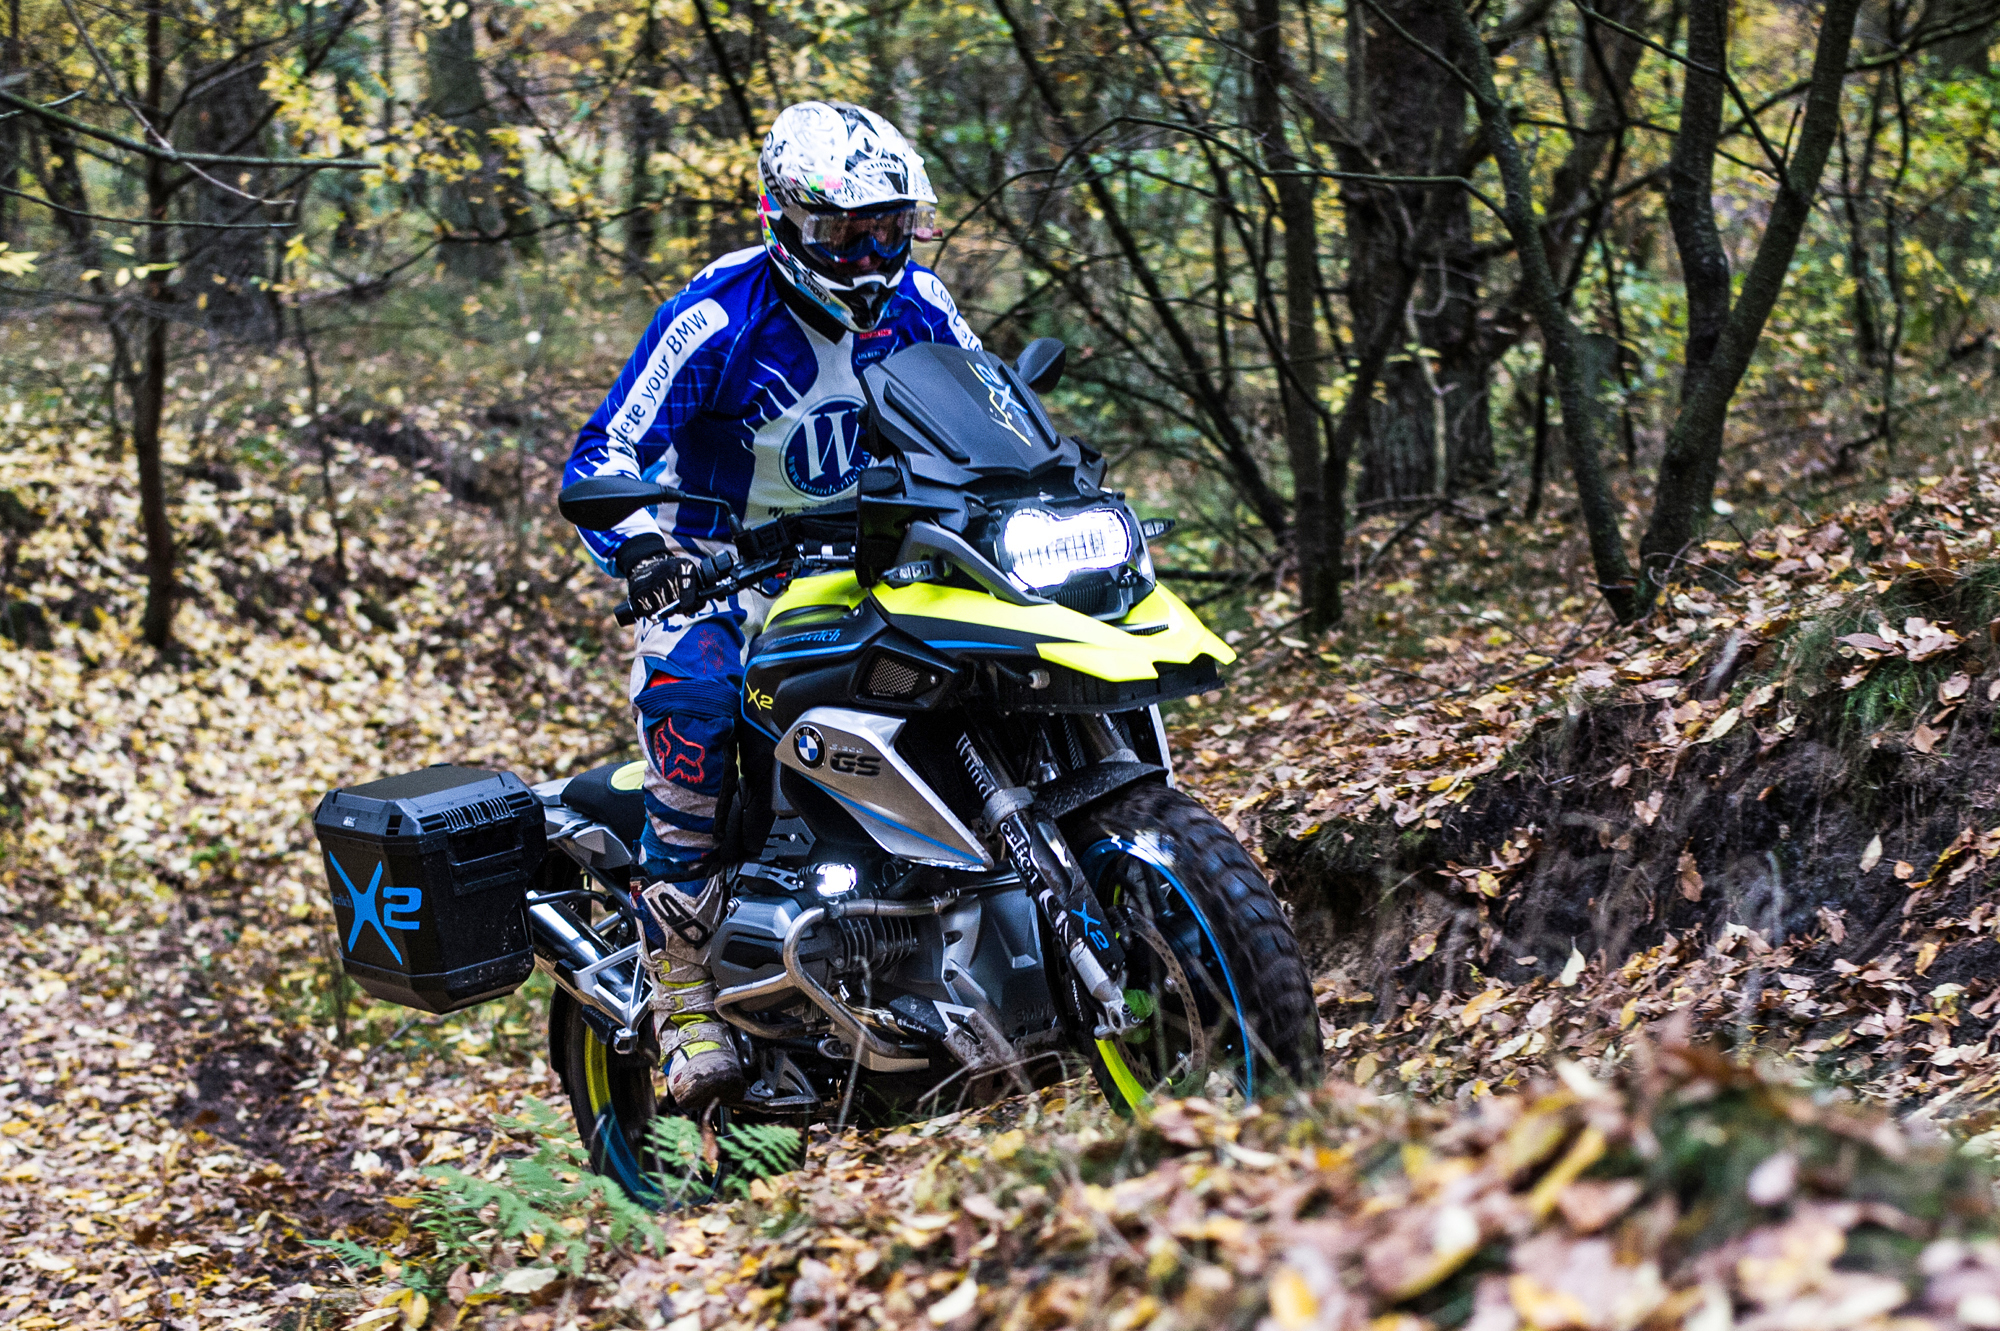 The two-wheel-drive R1200GS